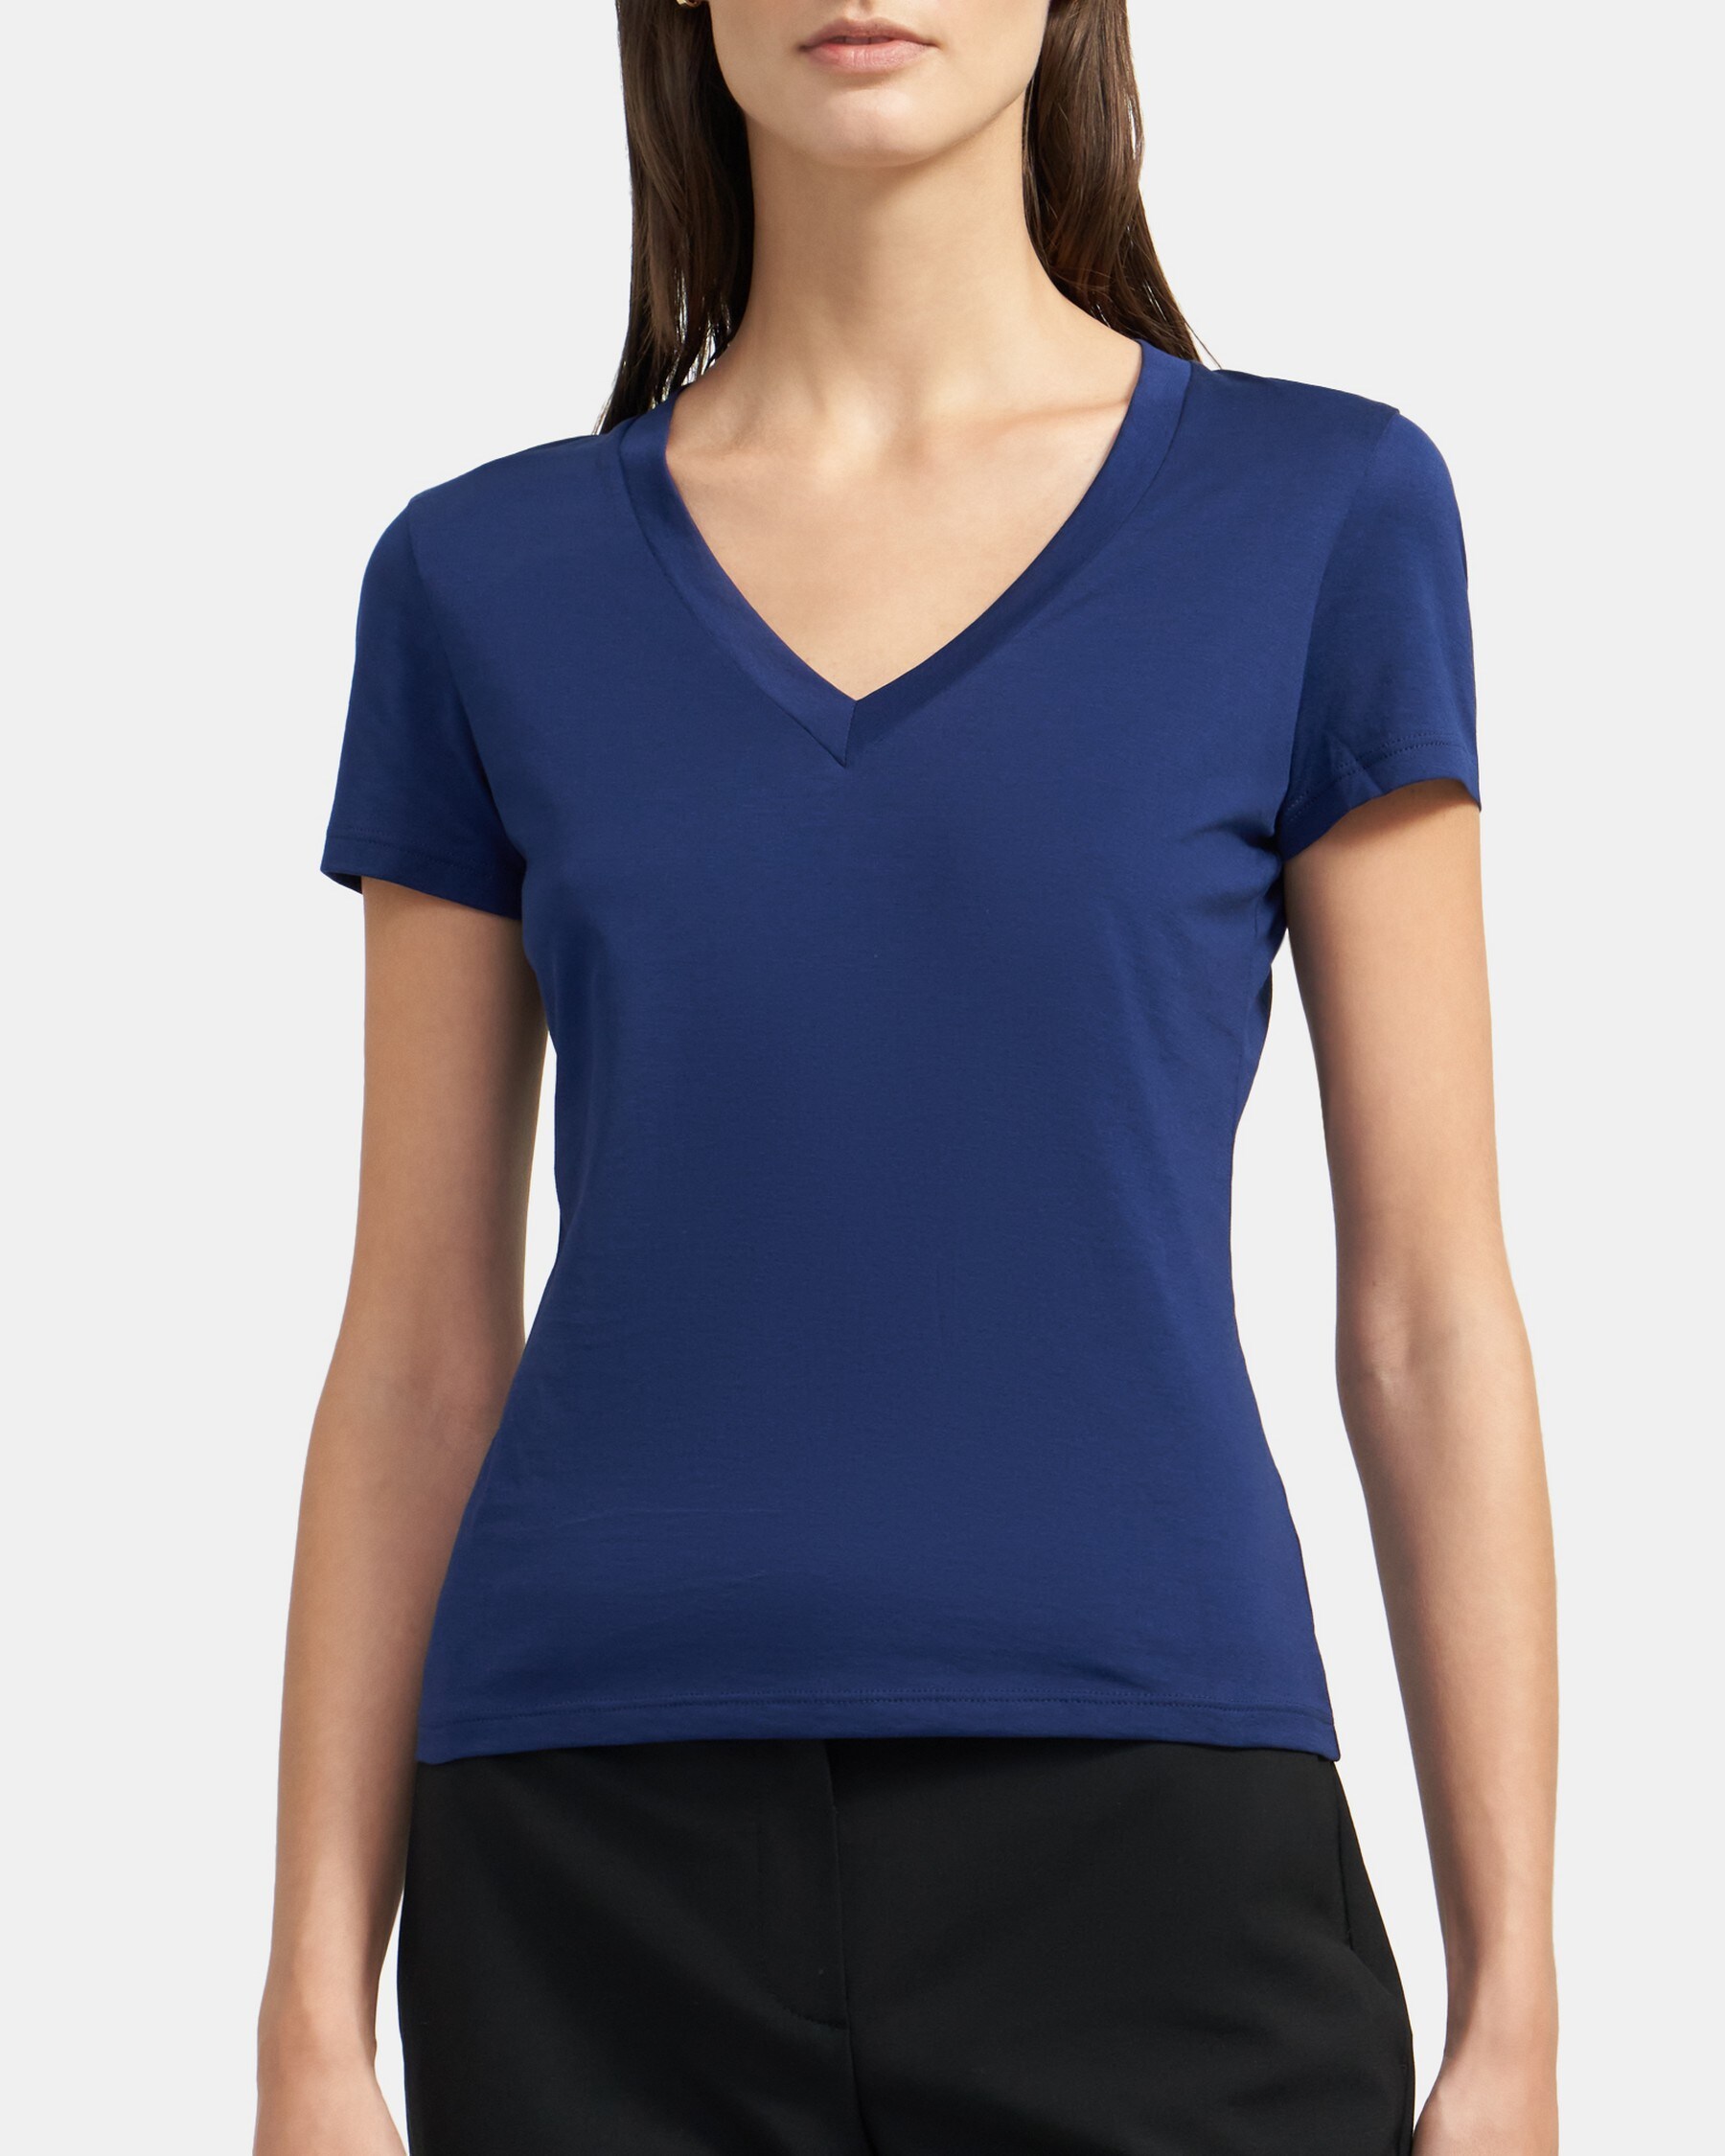 Fitted V-Neck Tee in Pima Cotton